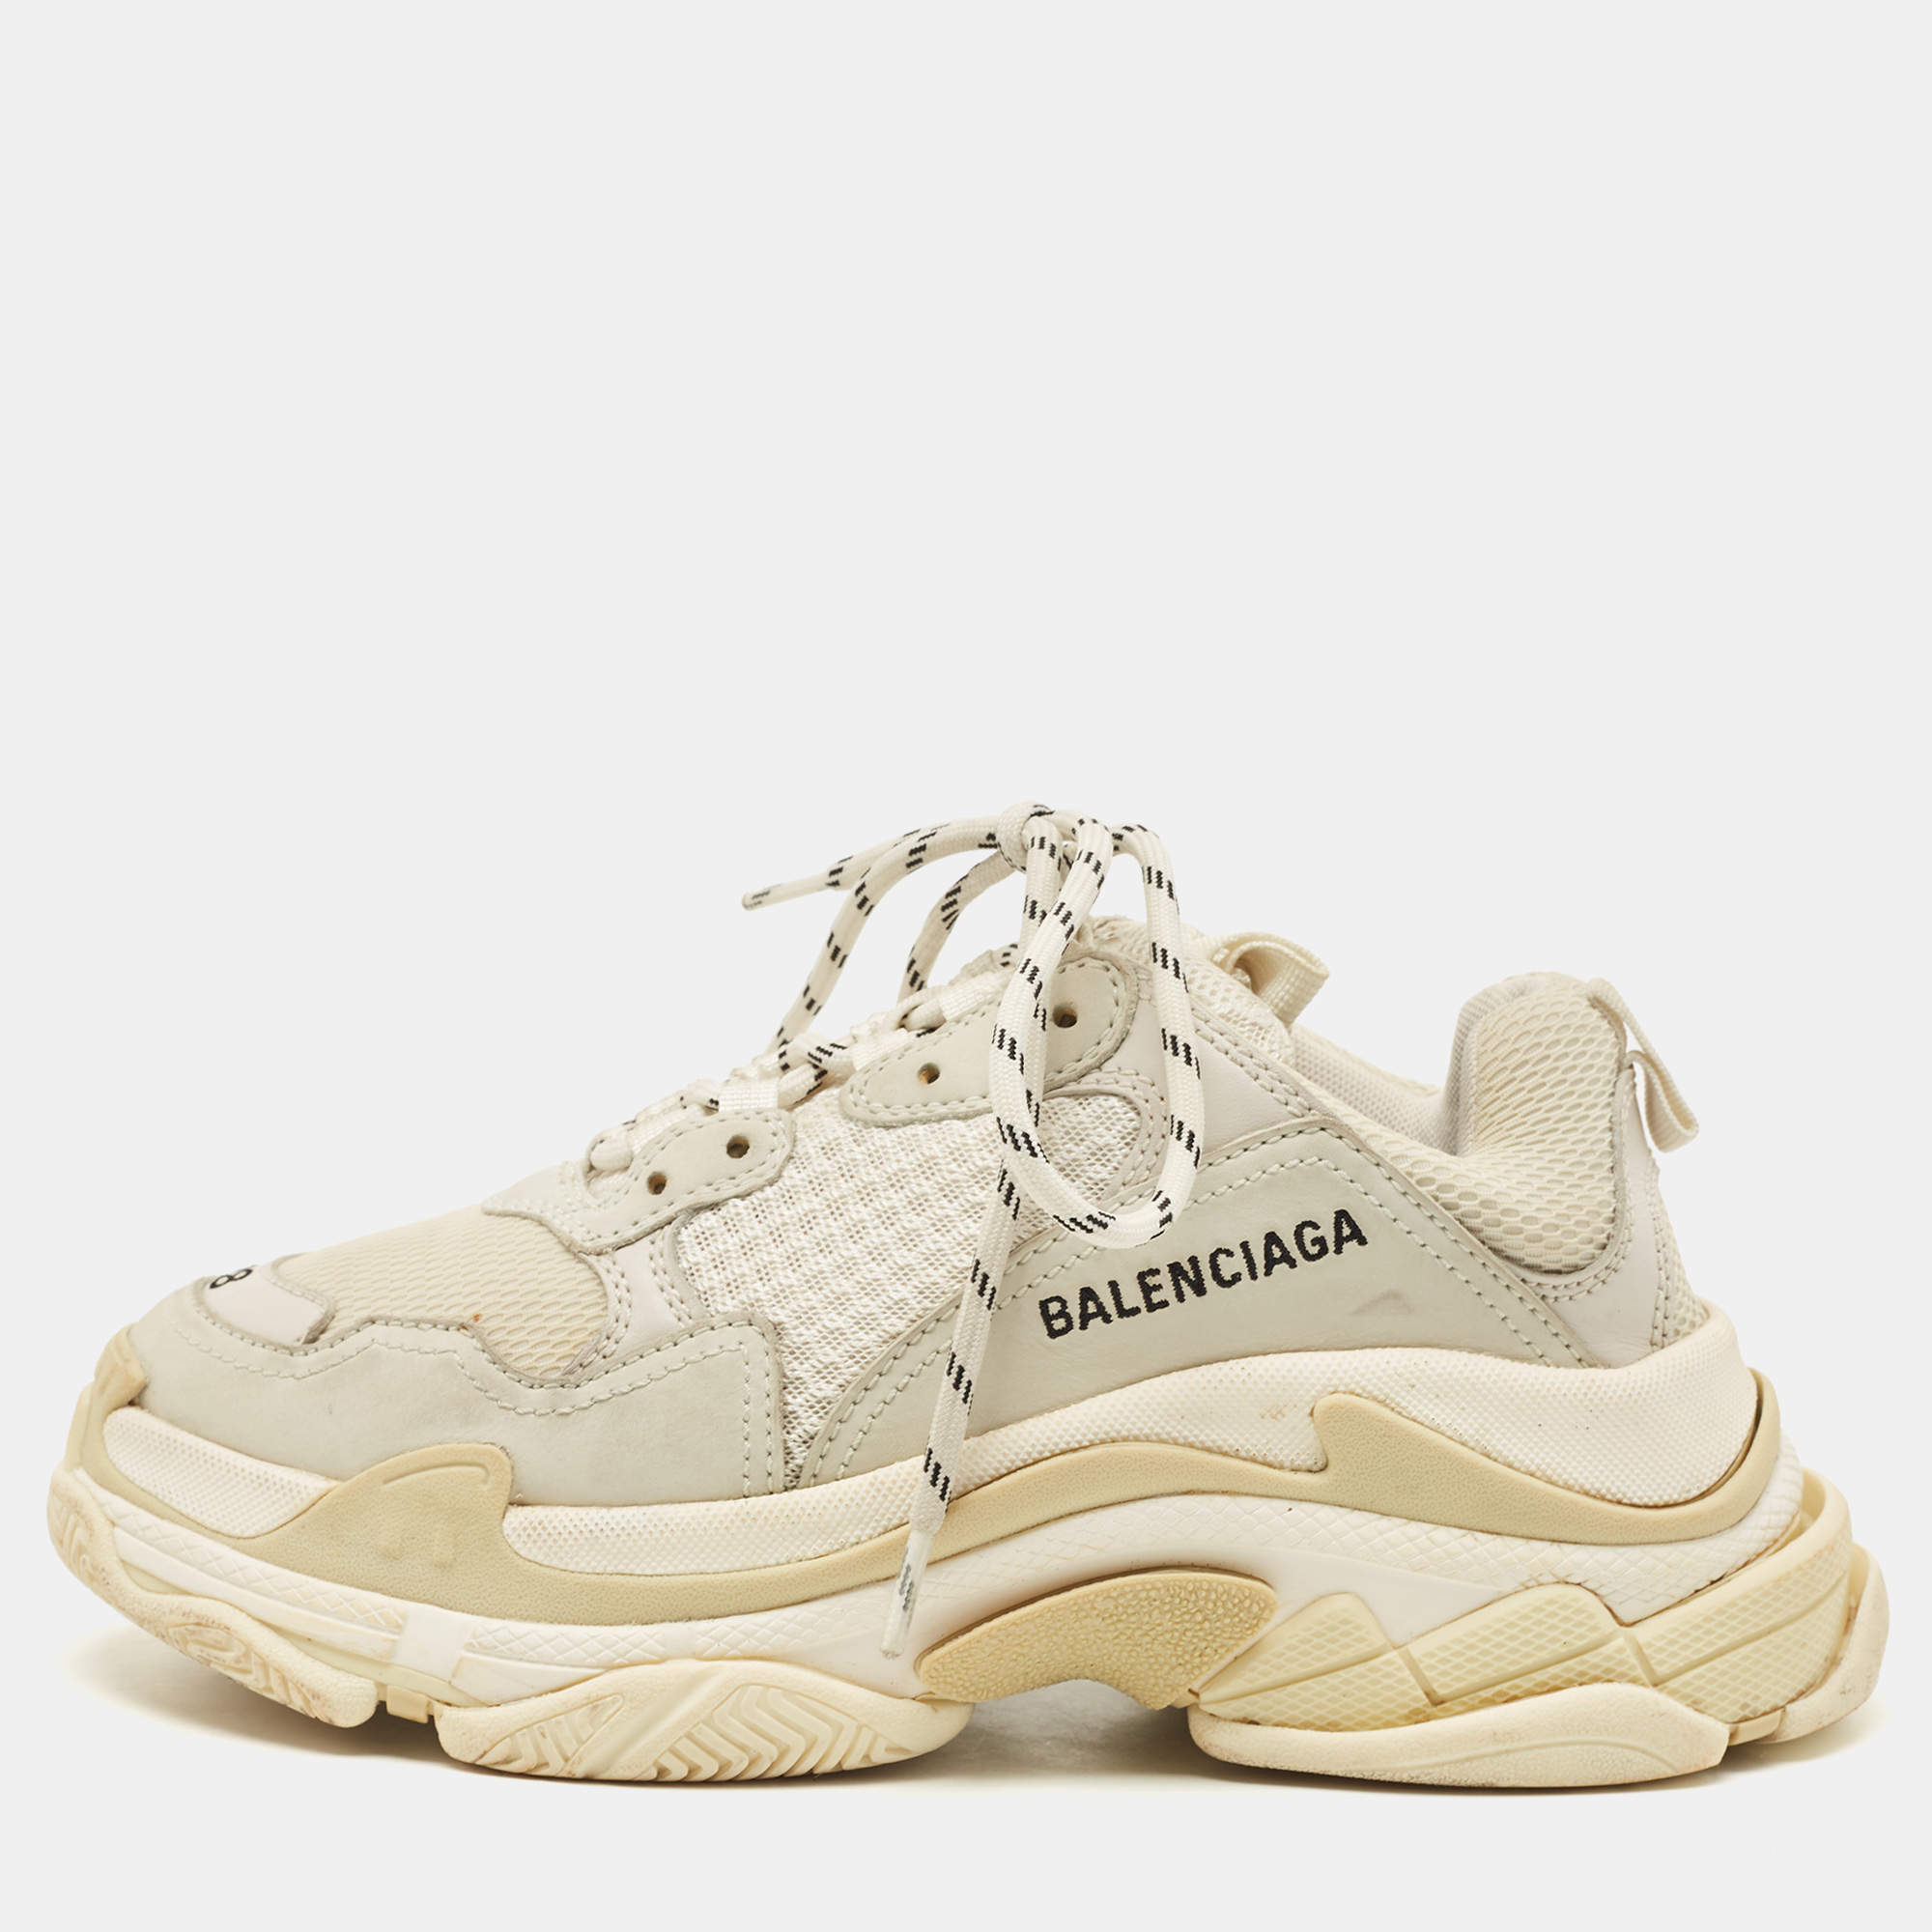 Balenciaga Shoes in Ghana for sale / Price in November 2023 on